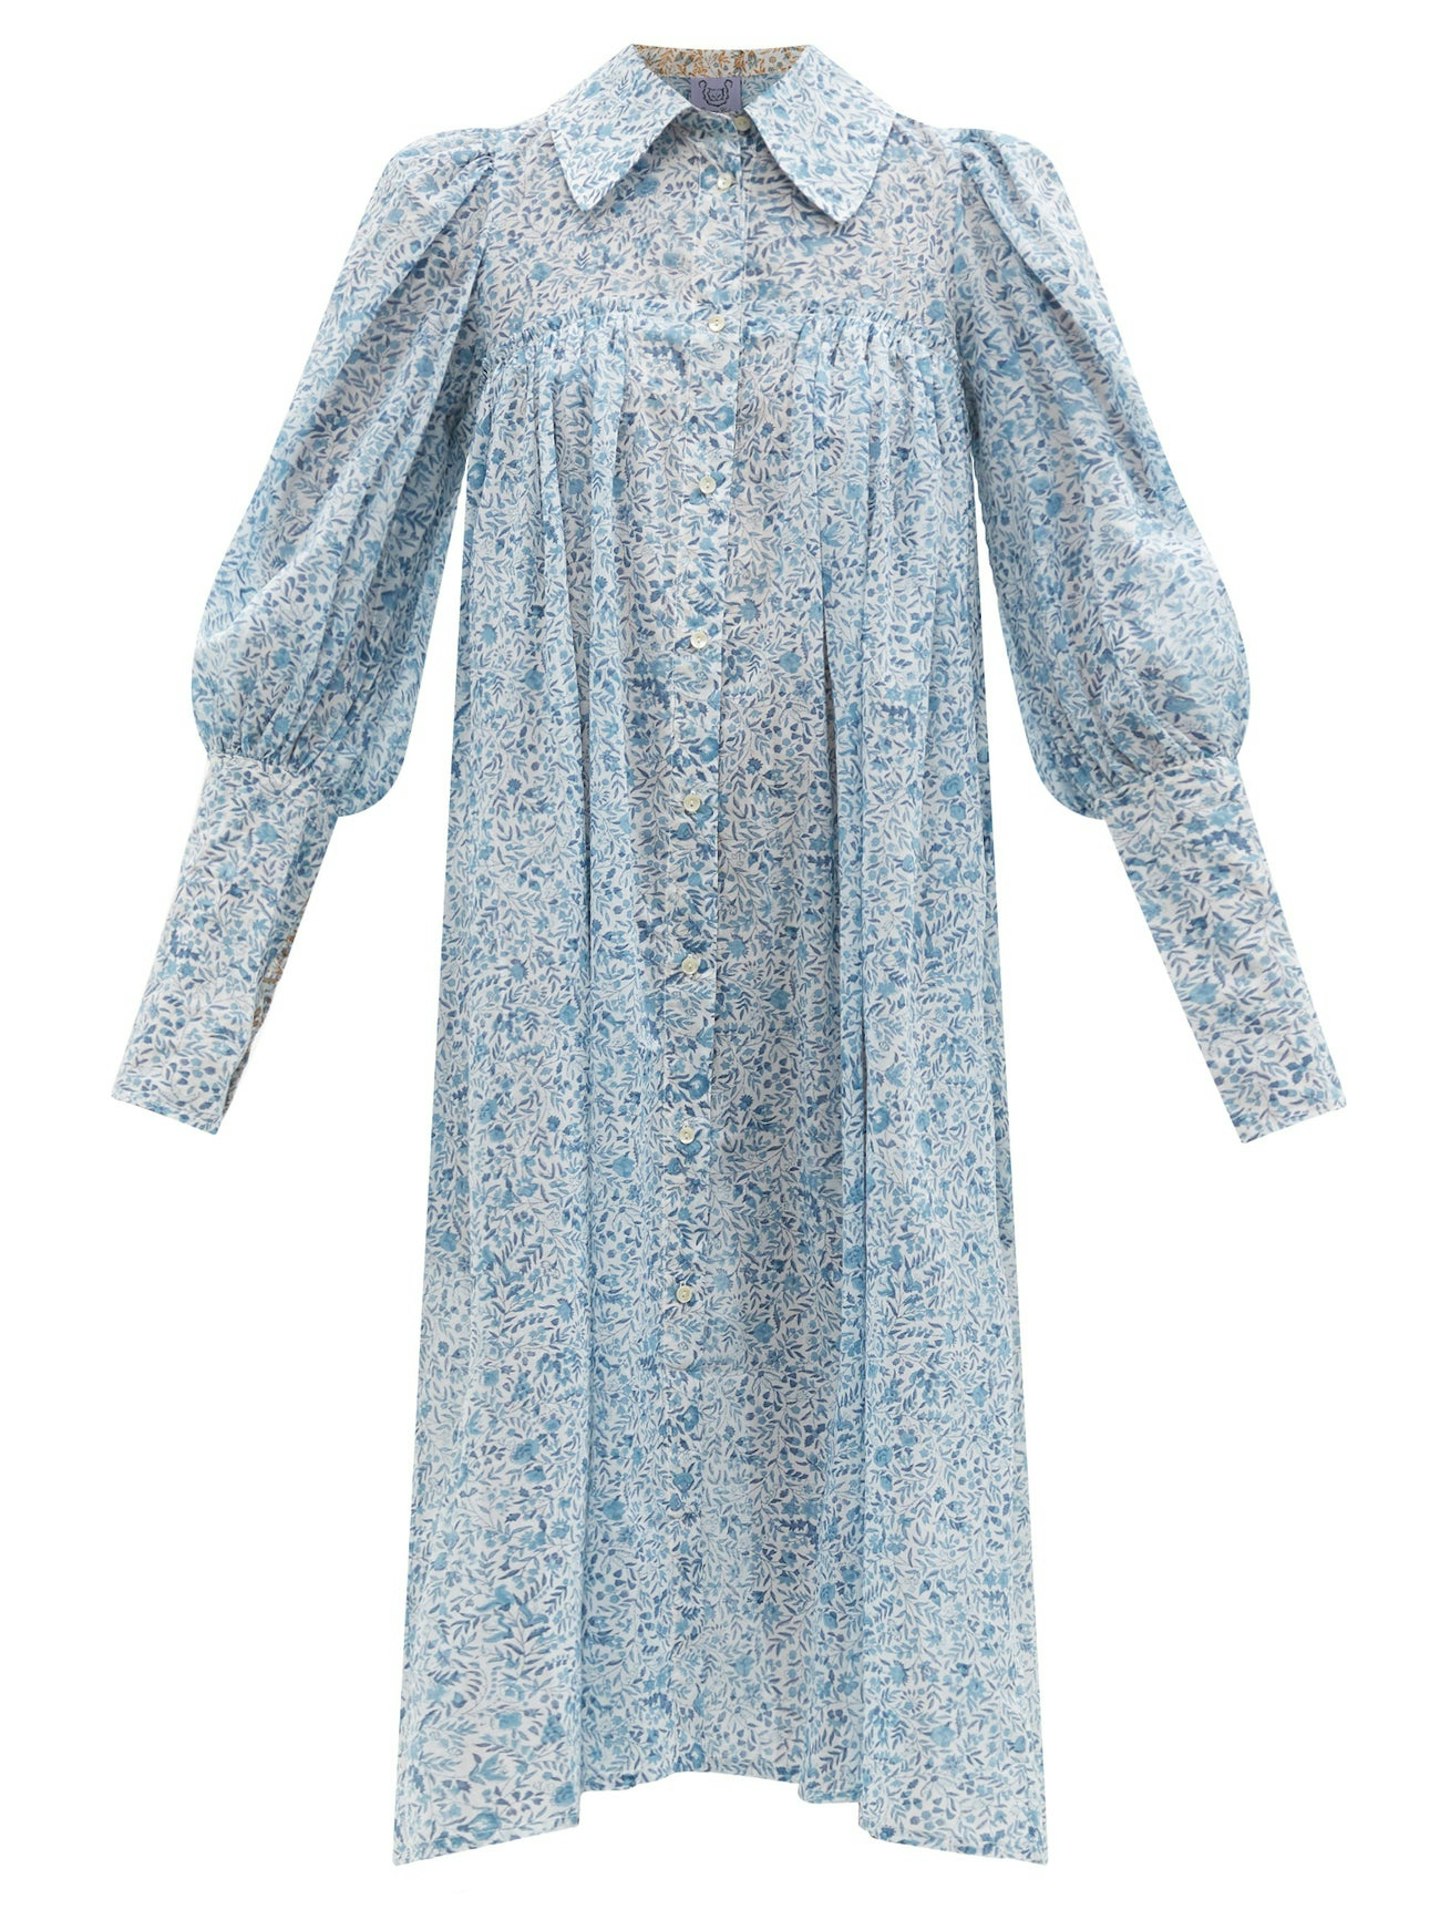 Thierry Colson, Blue Floral Print Dress, £340 at Matchesfashion